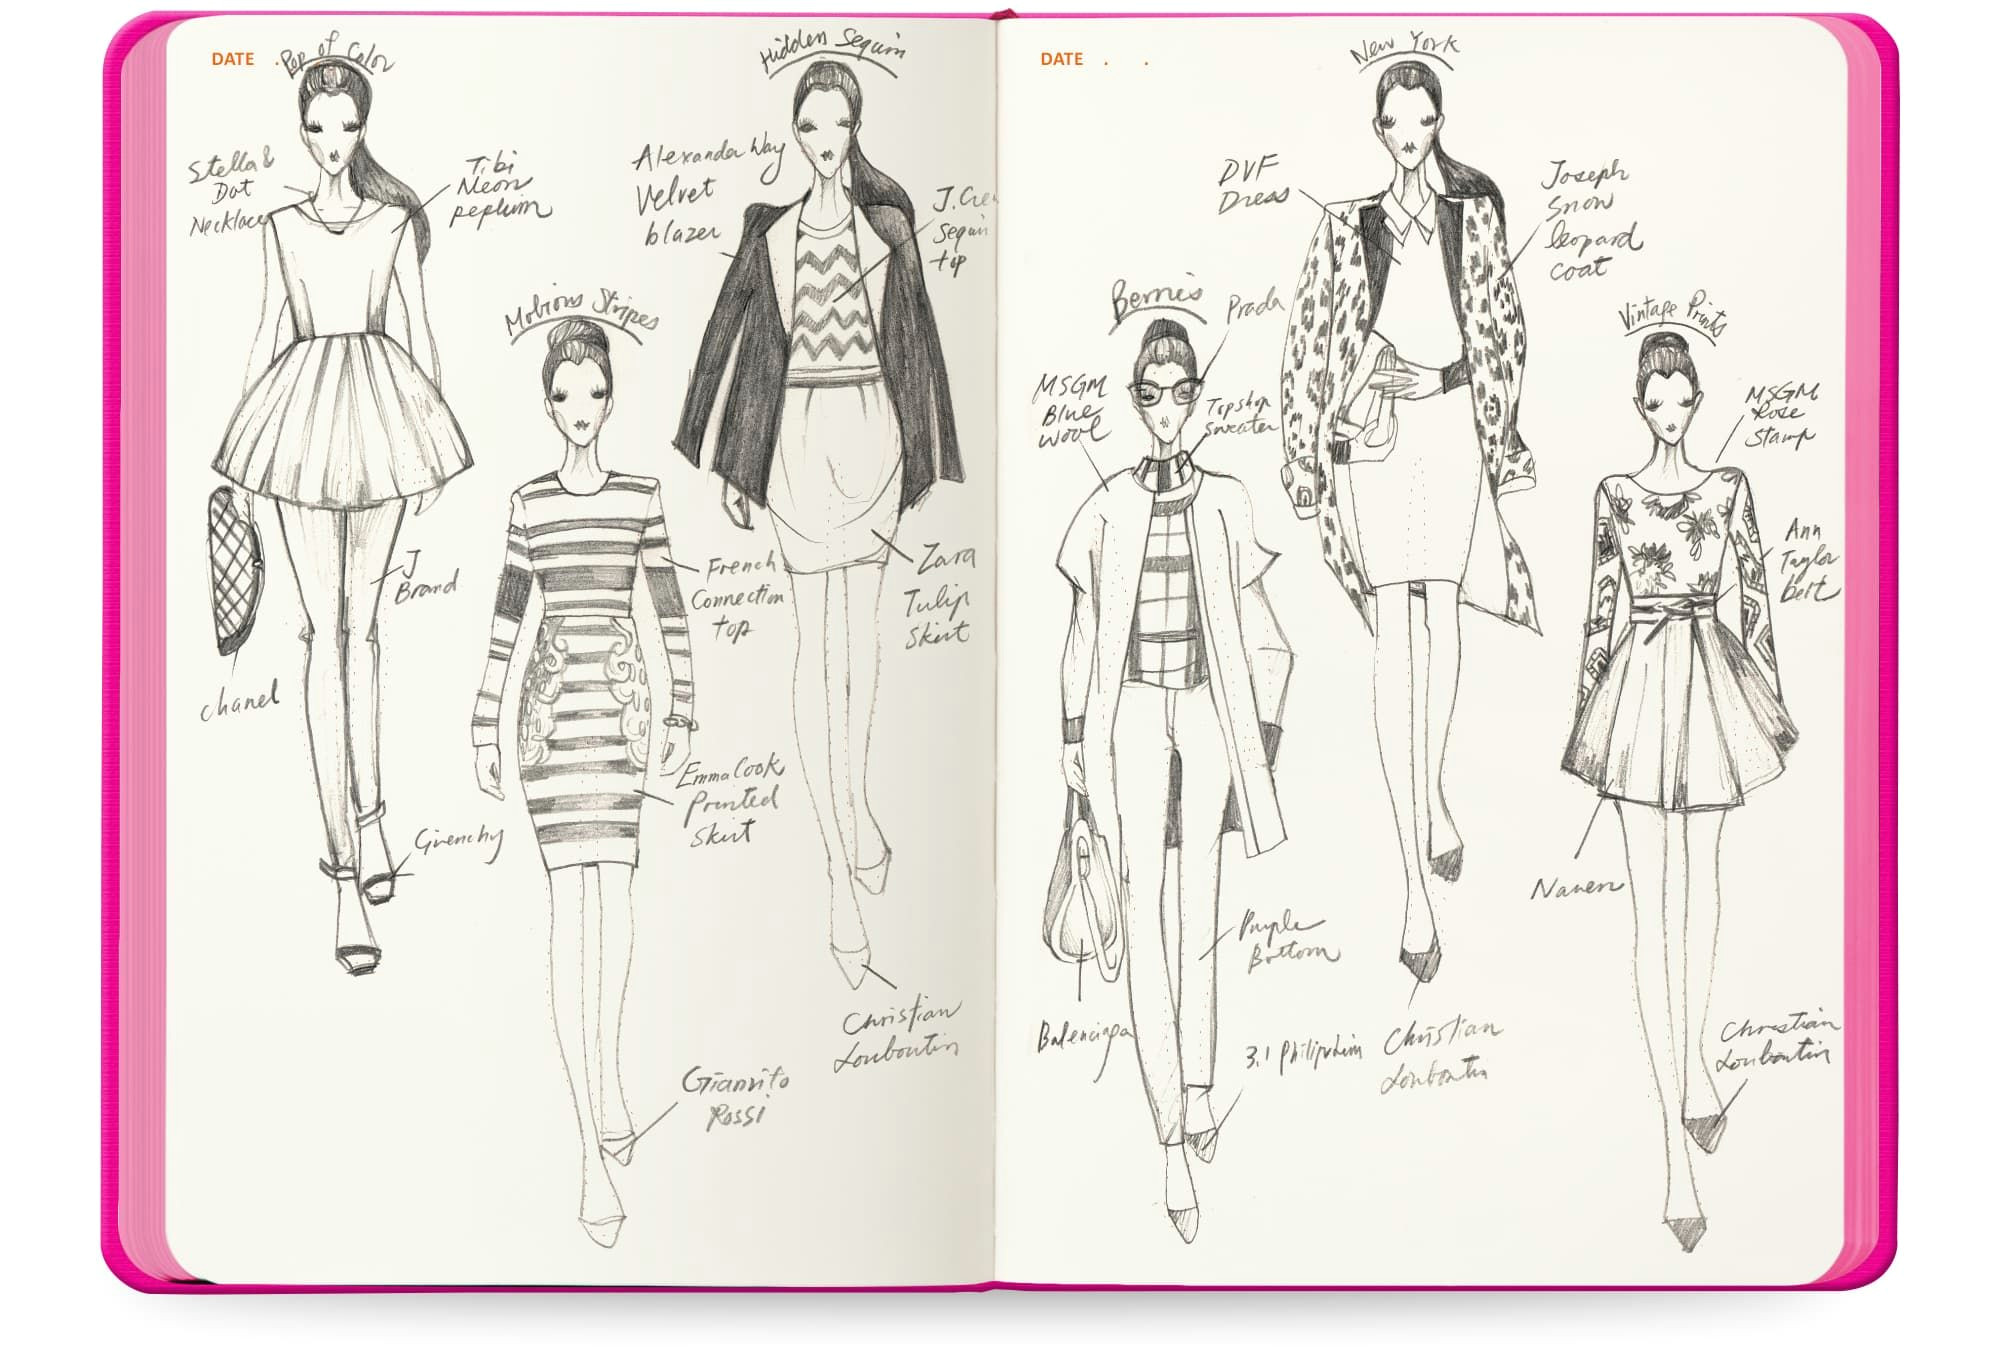 details tailor made for fashion designers aim for fast sketching and brainstorming mini fashion dictionary 400 barely visible templates pocket in